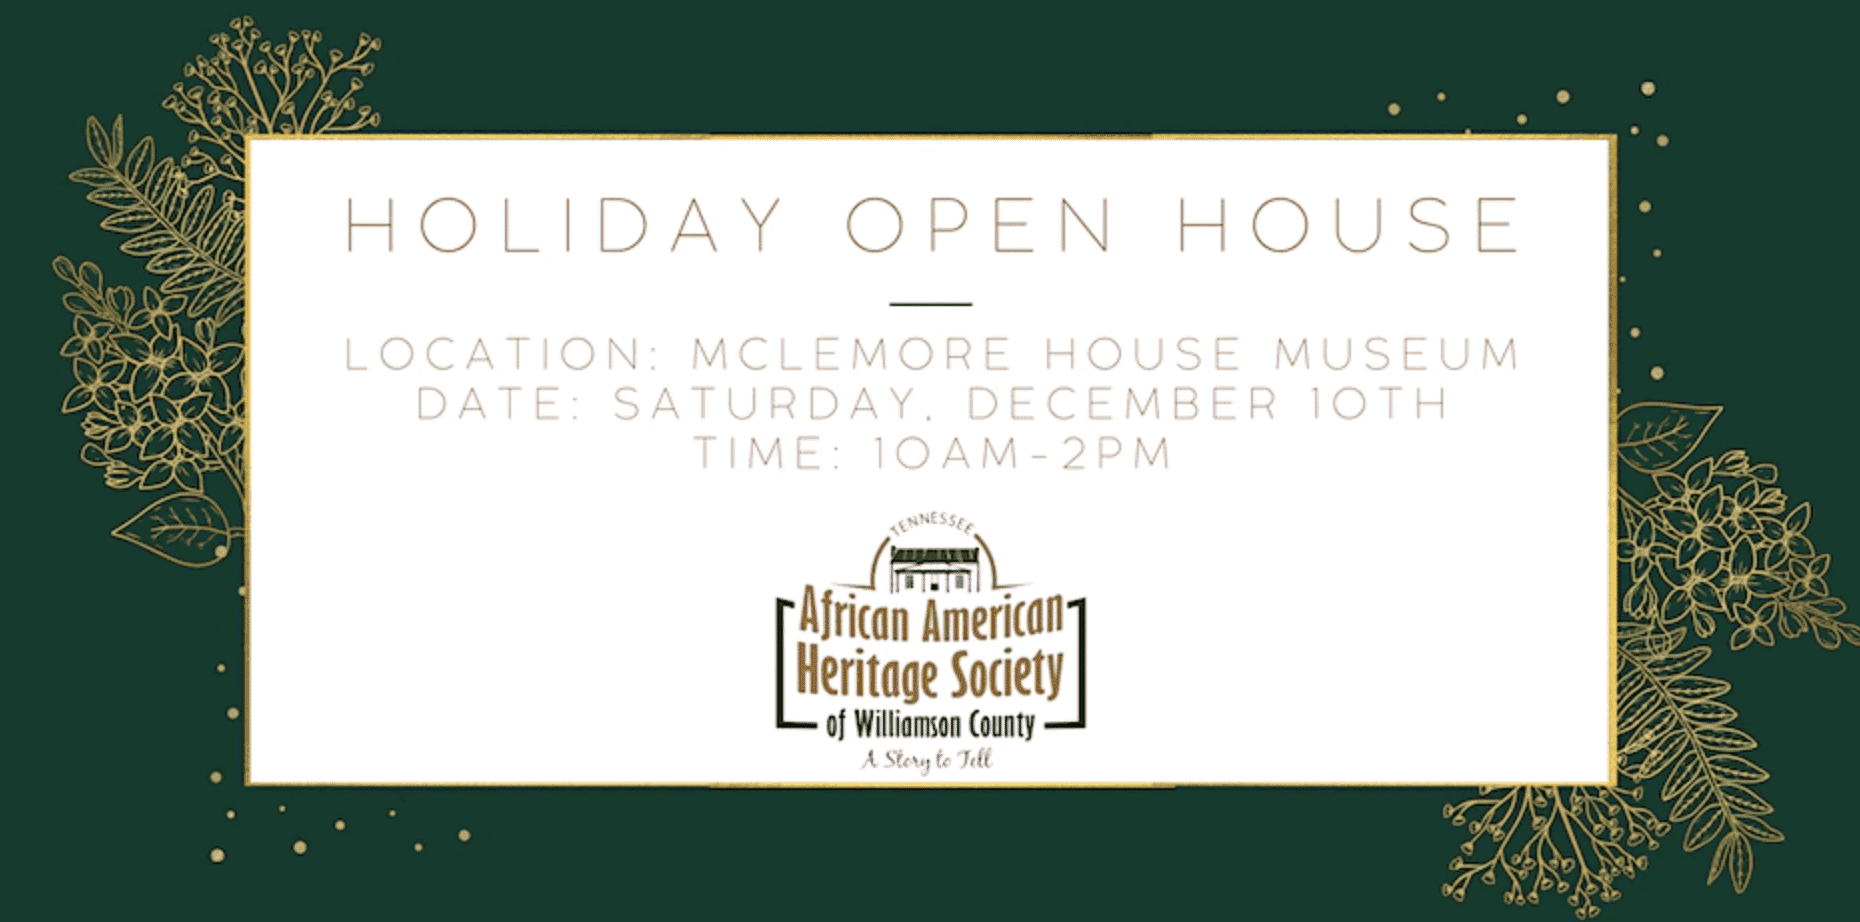 McLemore House Museum Holiday Open House